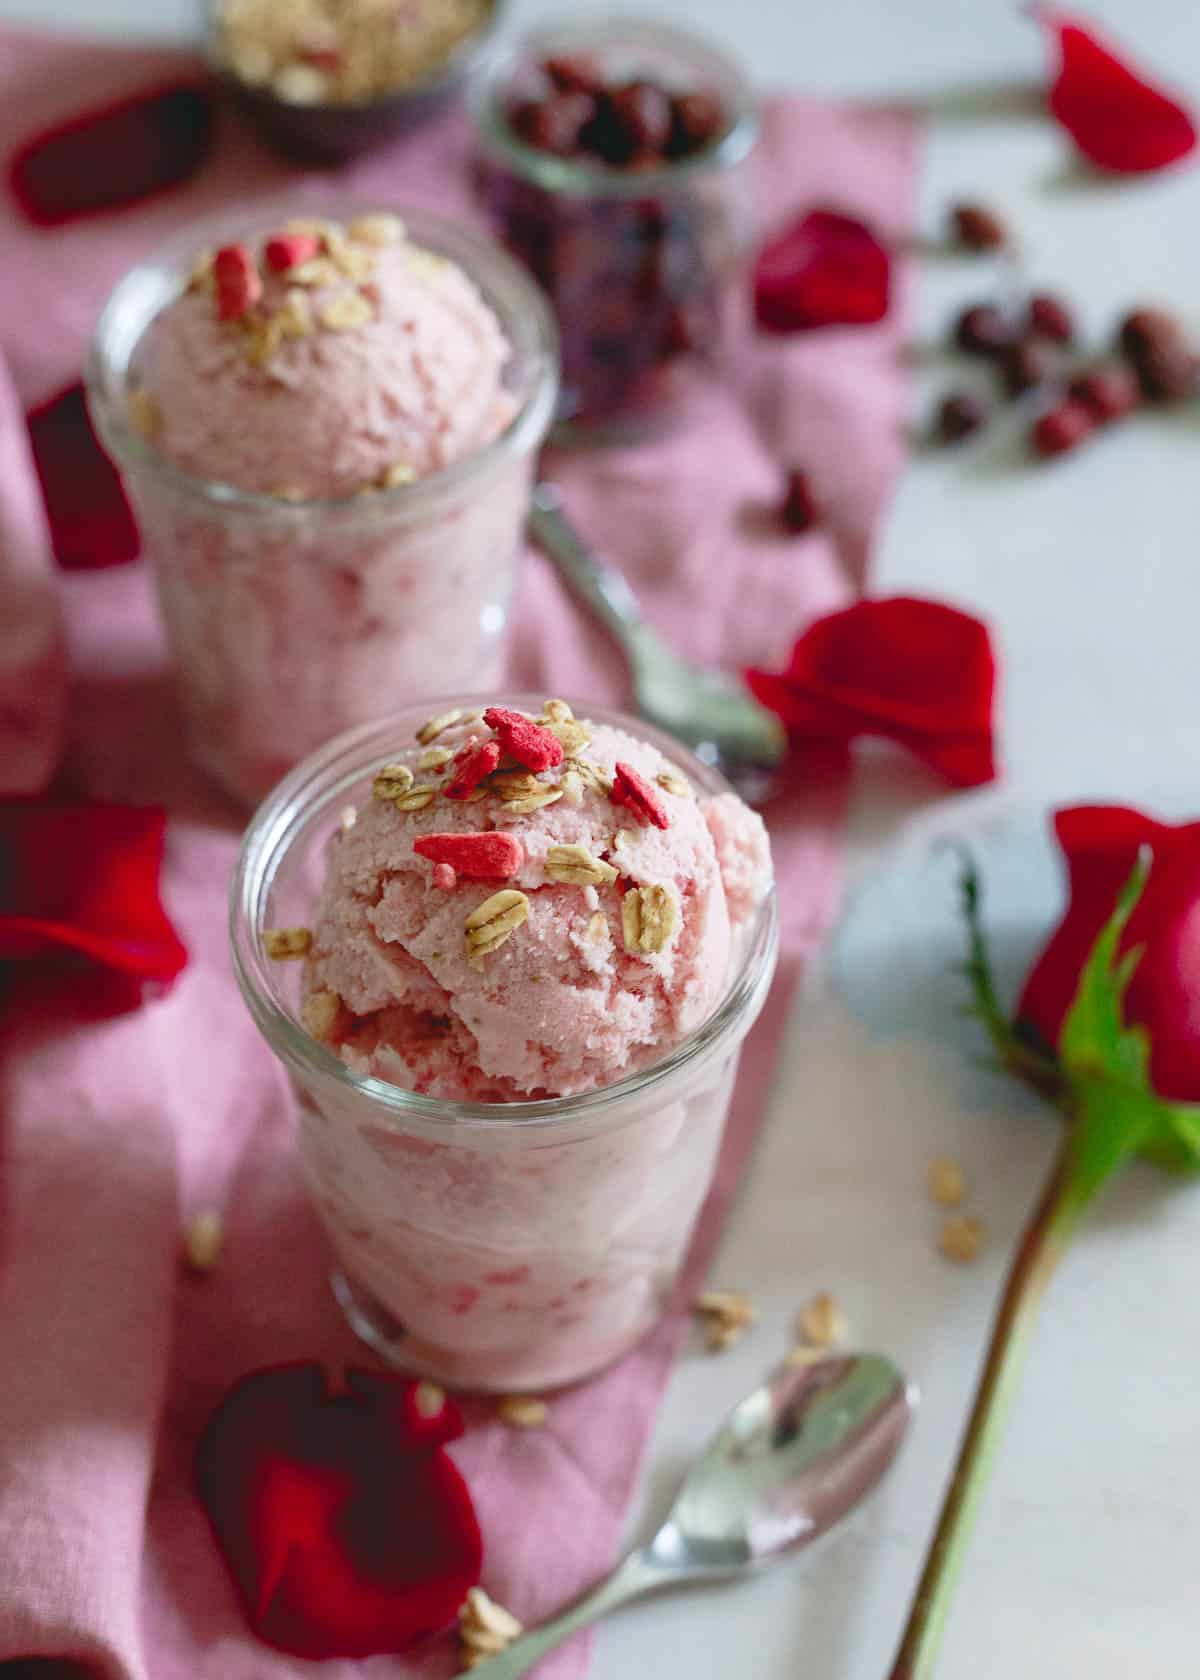 Creamy with a subtle hint of tang, this rosehip ice cream with strawberries and granola is a refreshing icy treat.